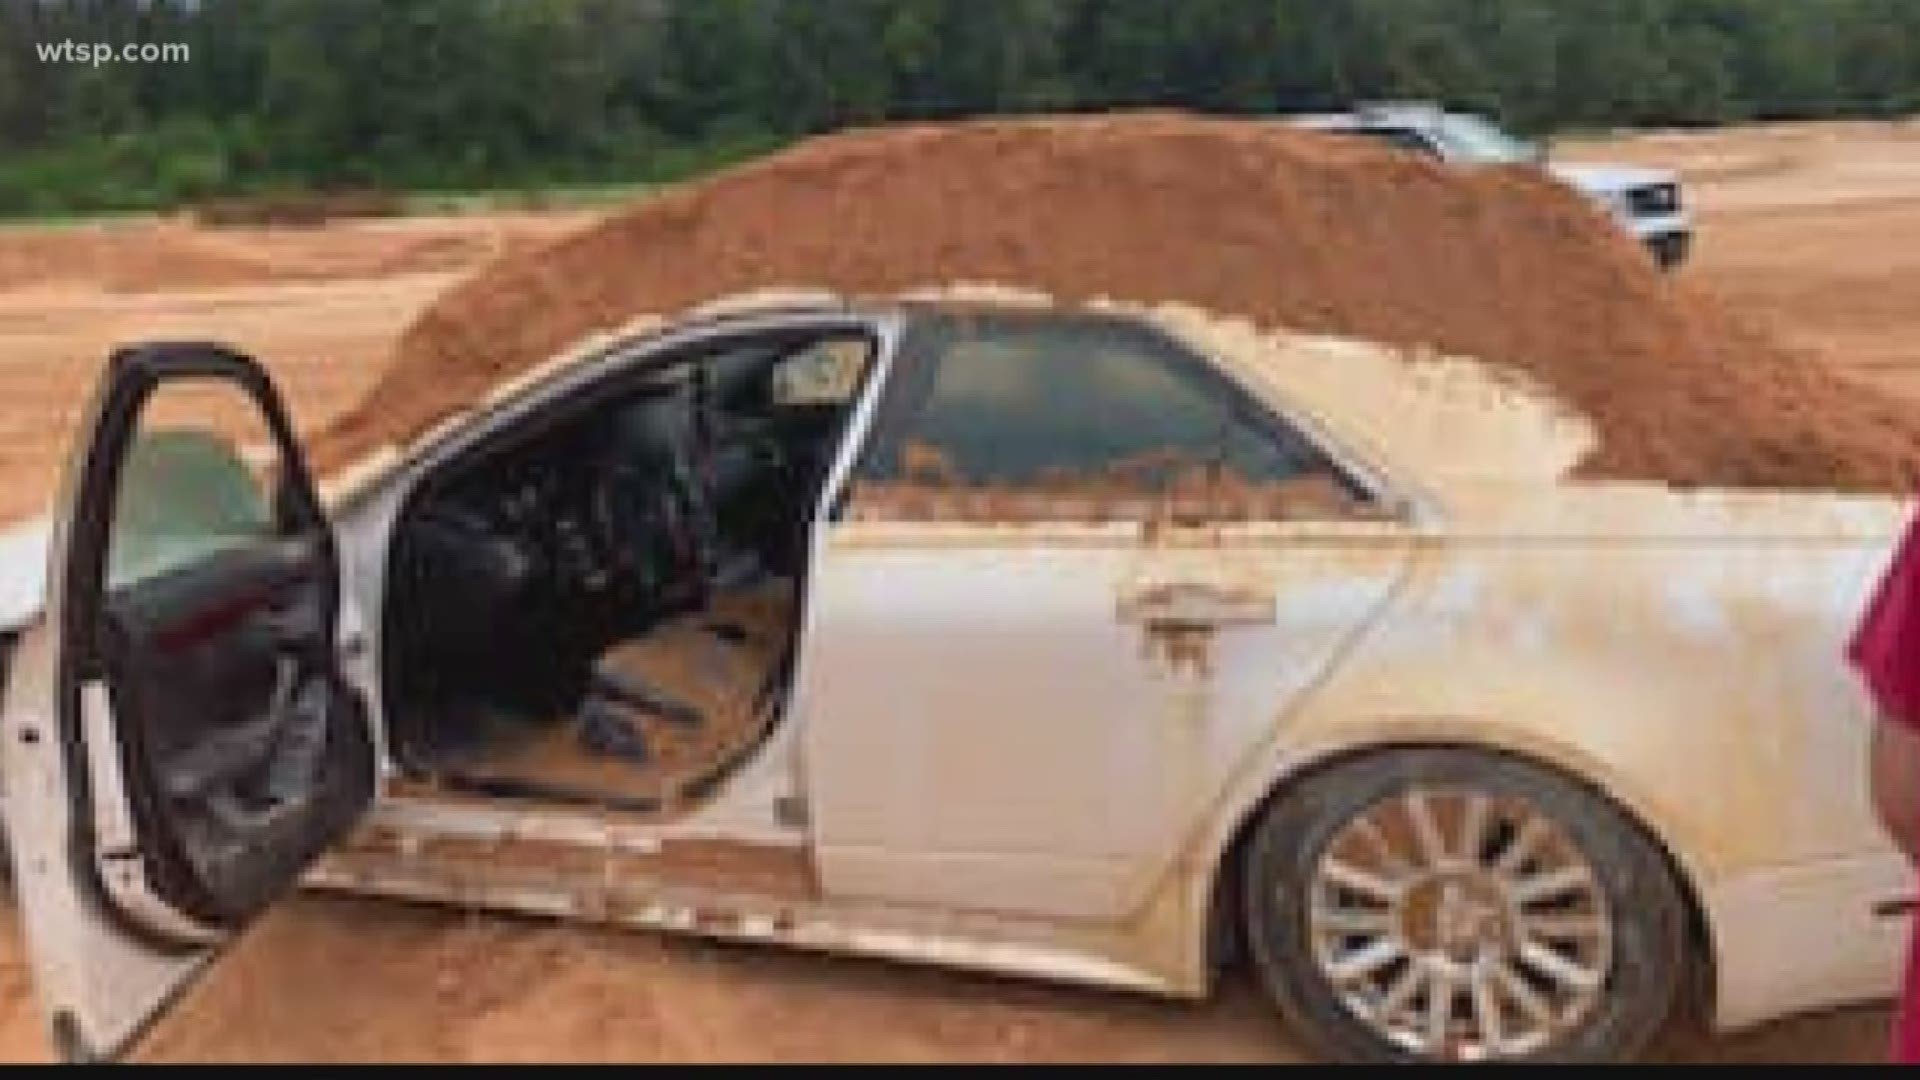 A 20-year-old Florida man found himself in deep trouble after he was accused of dumping dirt on a car his girlfriend was driving.

The Okaloosa County Sheriff’s Office said Hunter Mills called his girlfriend to talk. She showed up in a white 2010 Cadillac and refused to answer his question, deputies said.

Law enforcement said Mills used a front-ended loader to dump a bucket full of dirt on the car.